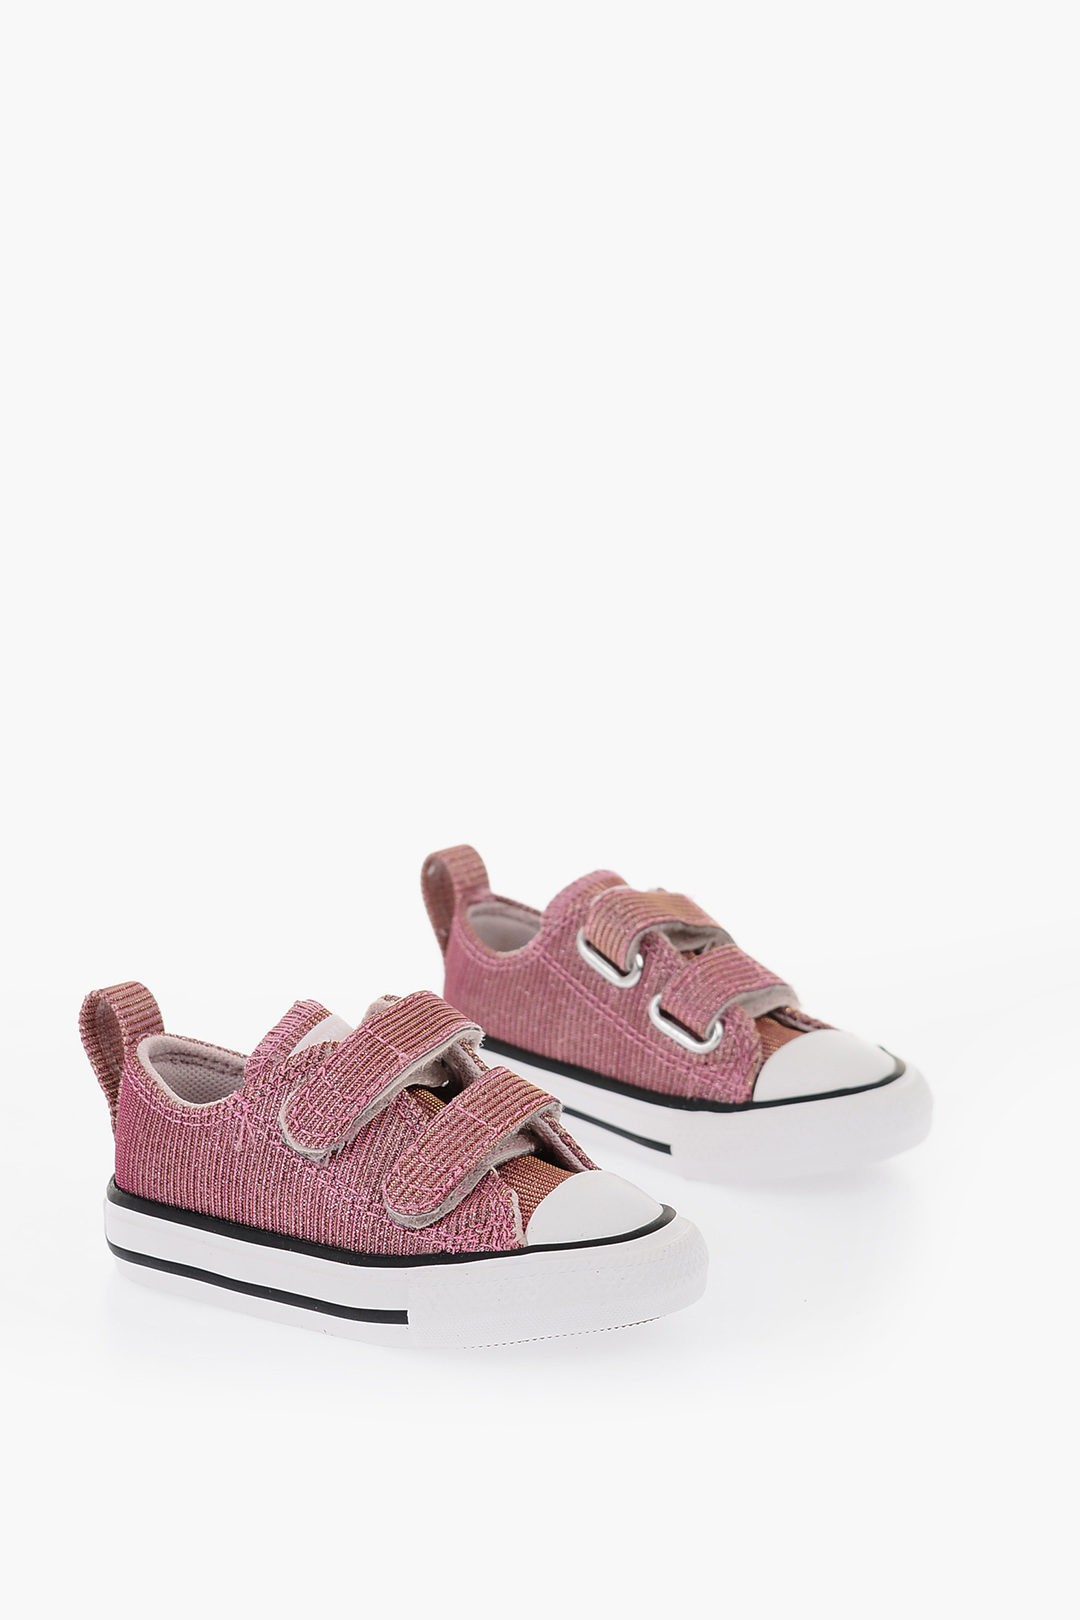 Converse KIDS ALL STAR Lurex Sneakers with Strap Closure girls - Glamood Outlet